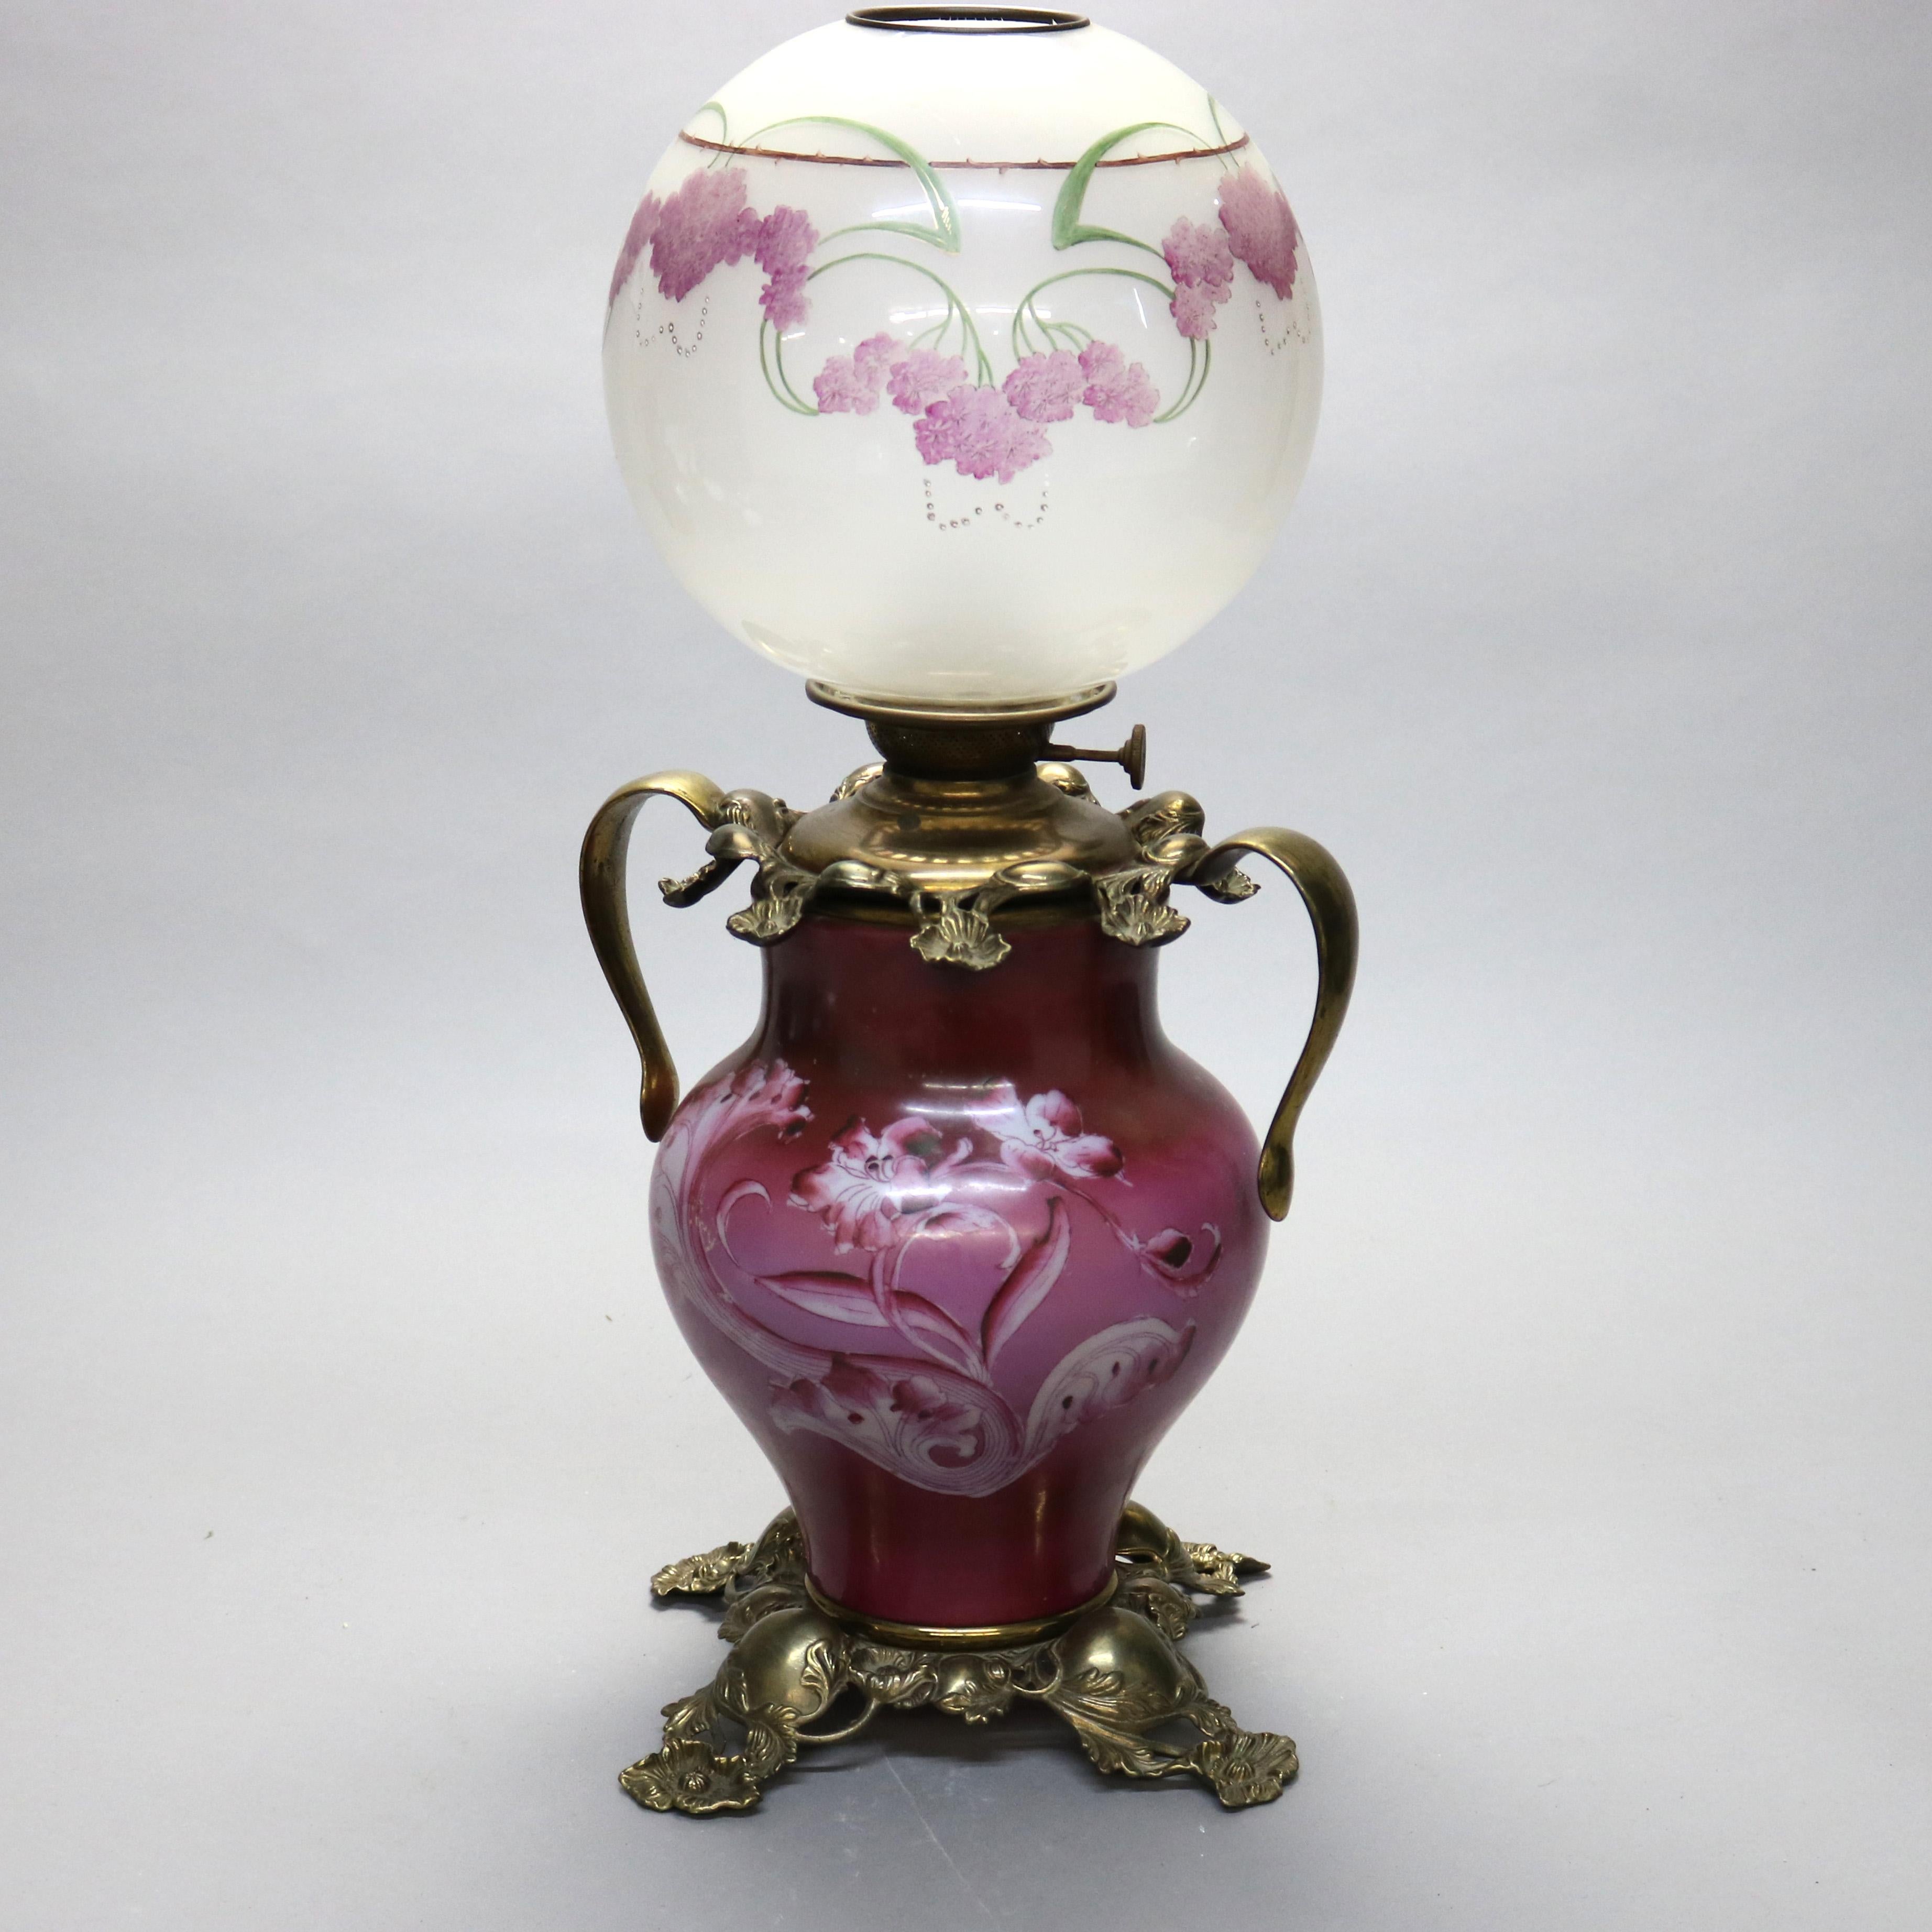 An antique Victorian kerosene table lamp offers floral hand painted glass globe and font in double handled foliate cast frame, not electrified, c1890

Measures - 25.5'' H x 13.5'' W x 13.5'' D.